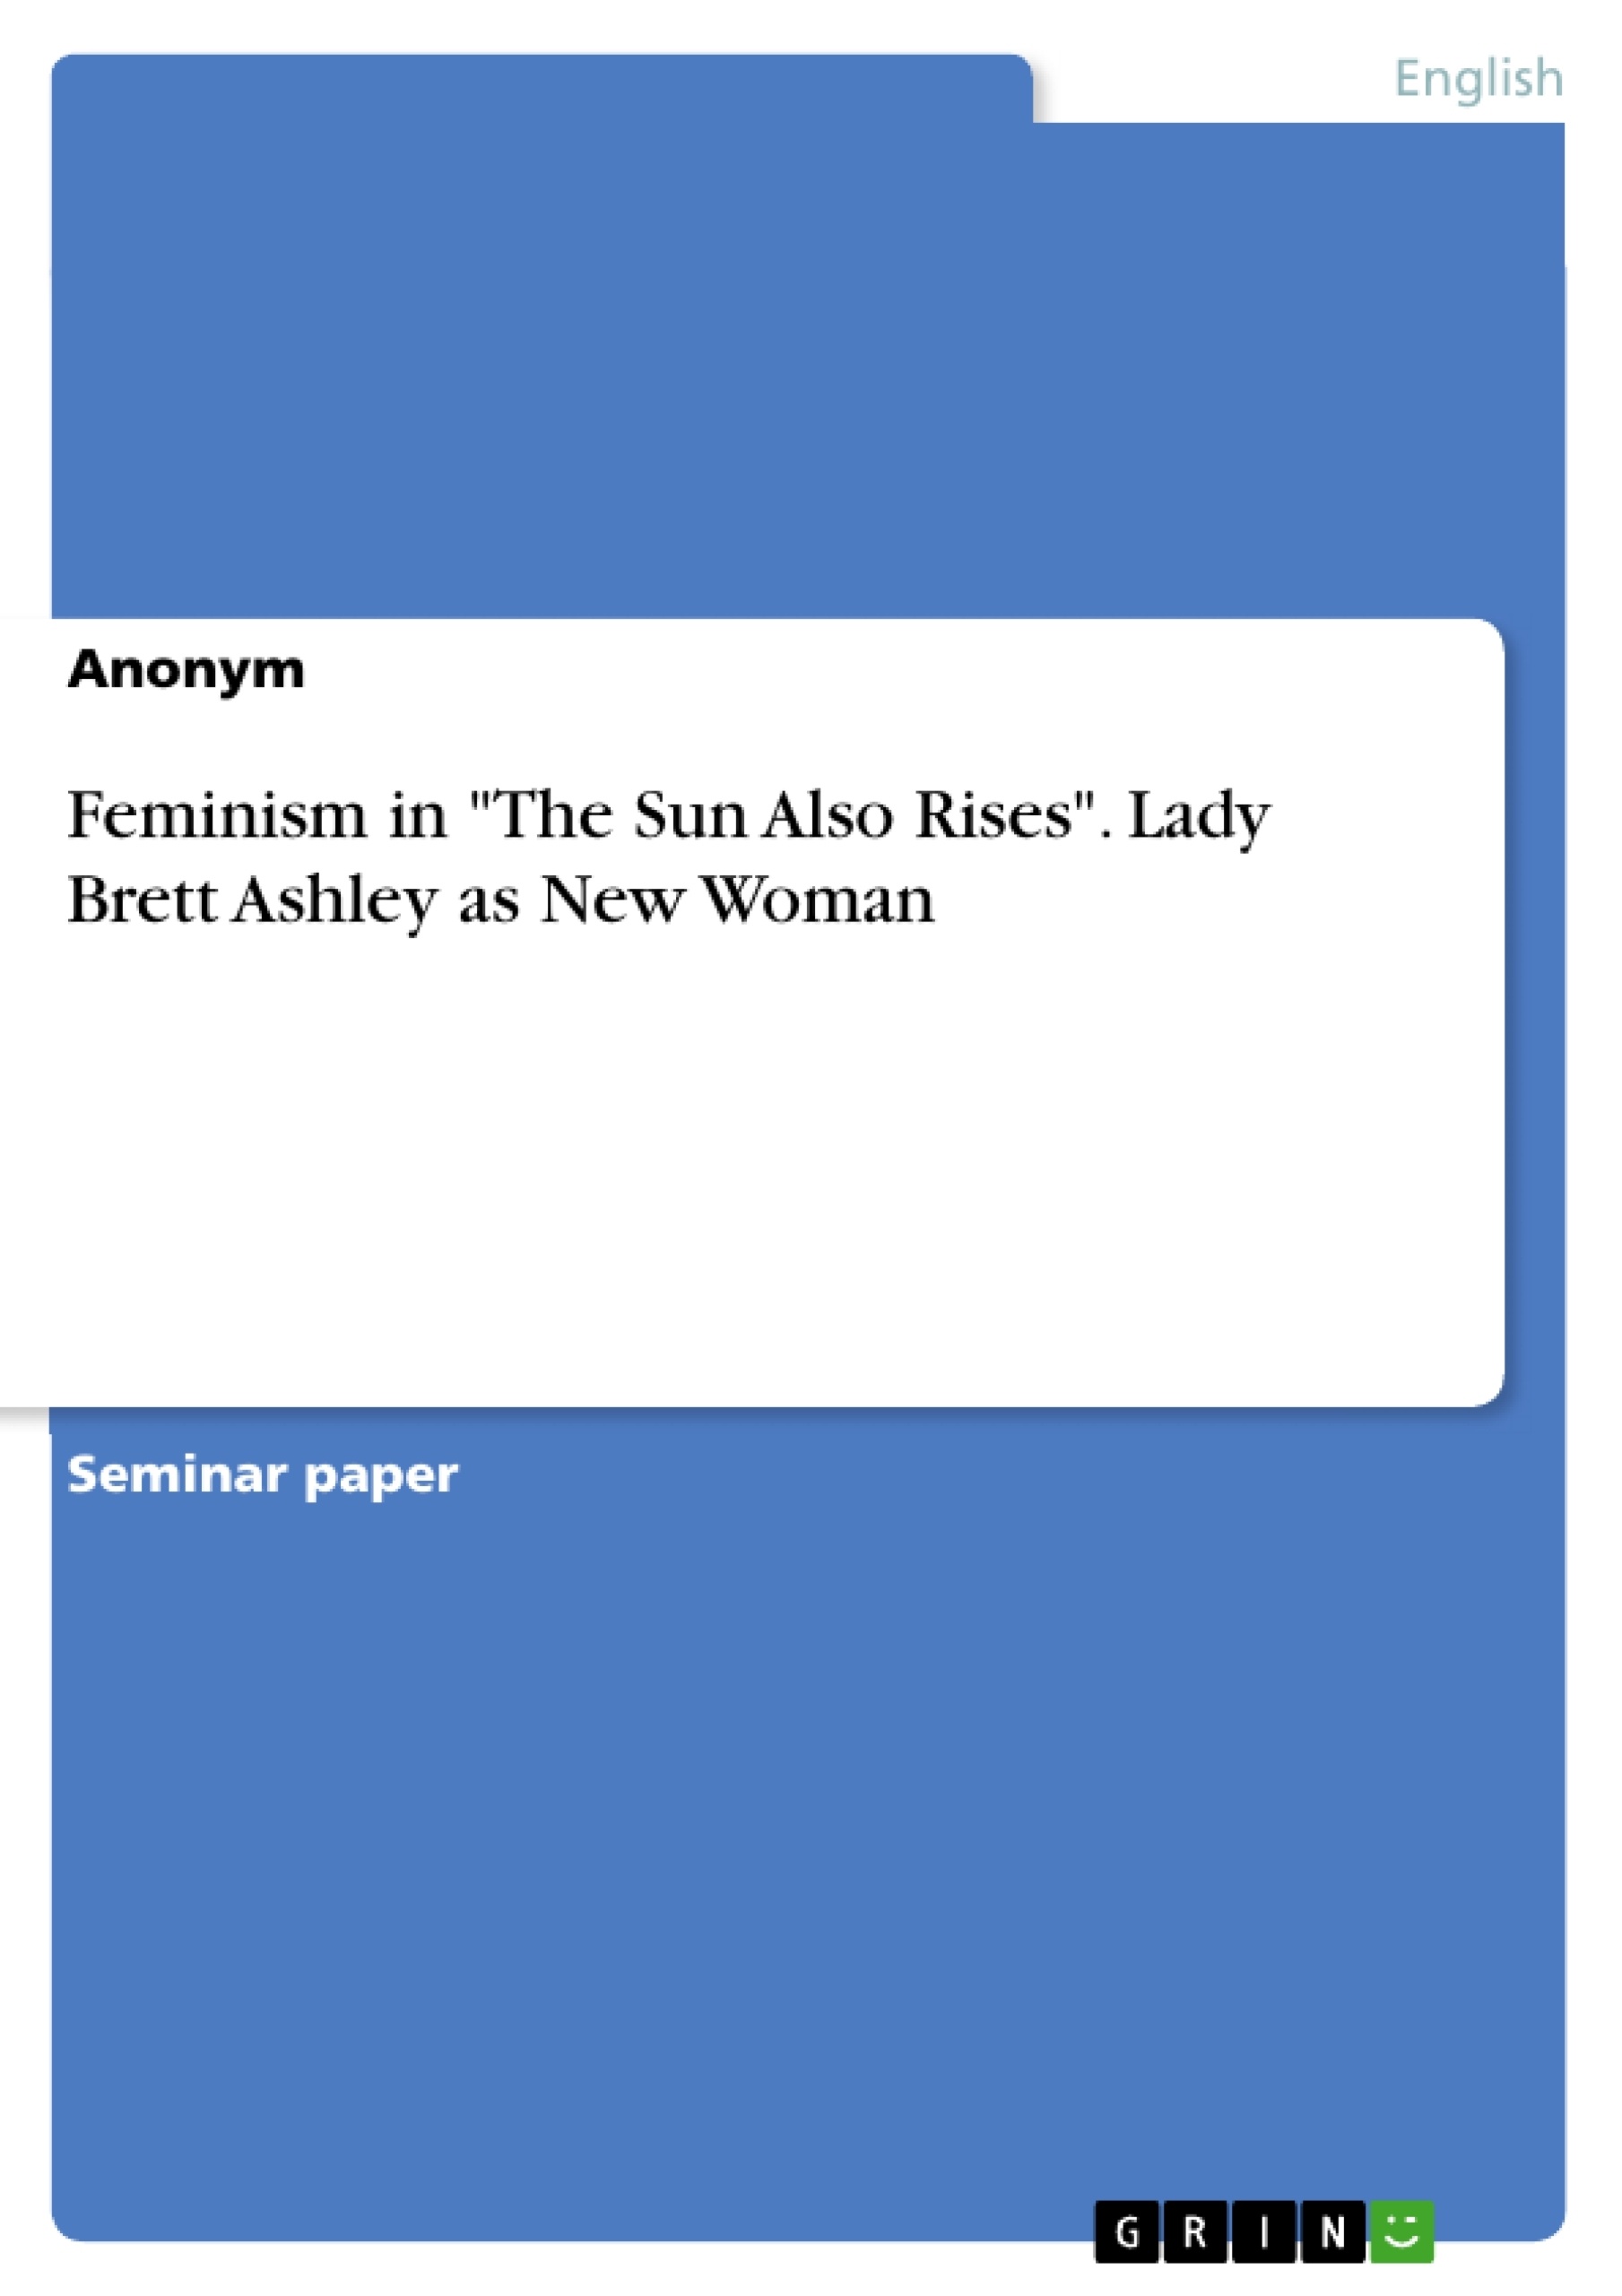 Título: Feminism in "The Sun Also Rises". Lady Brett Ashley as New Woman